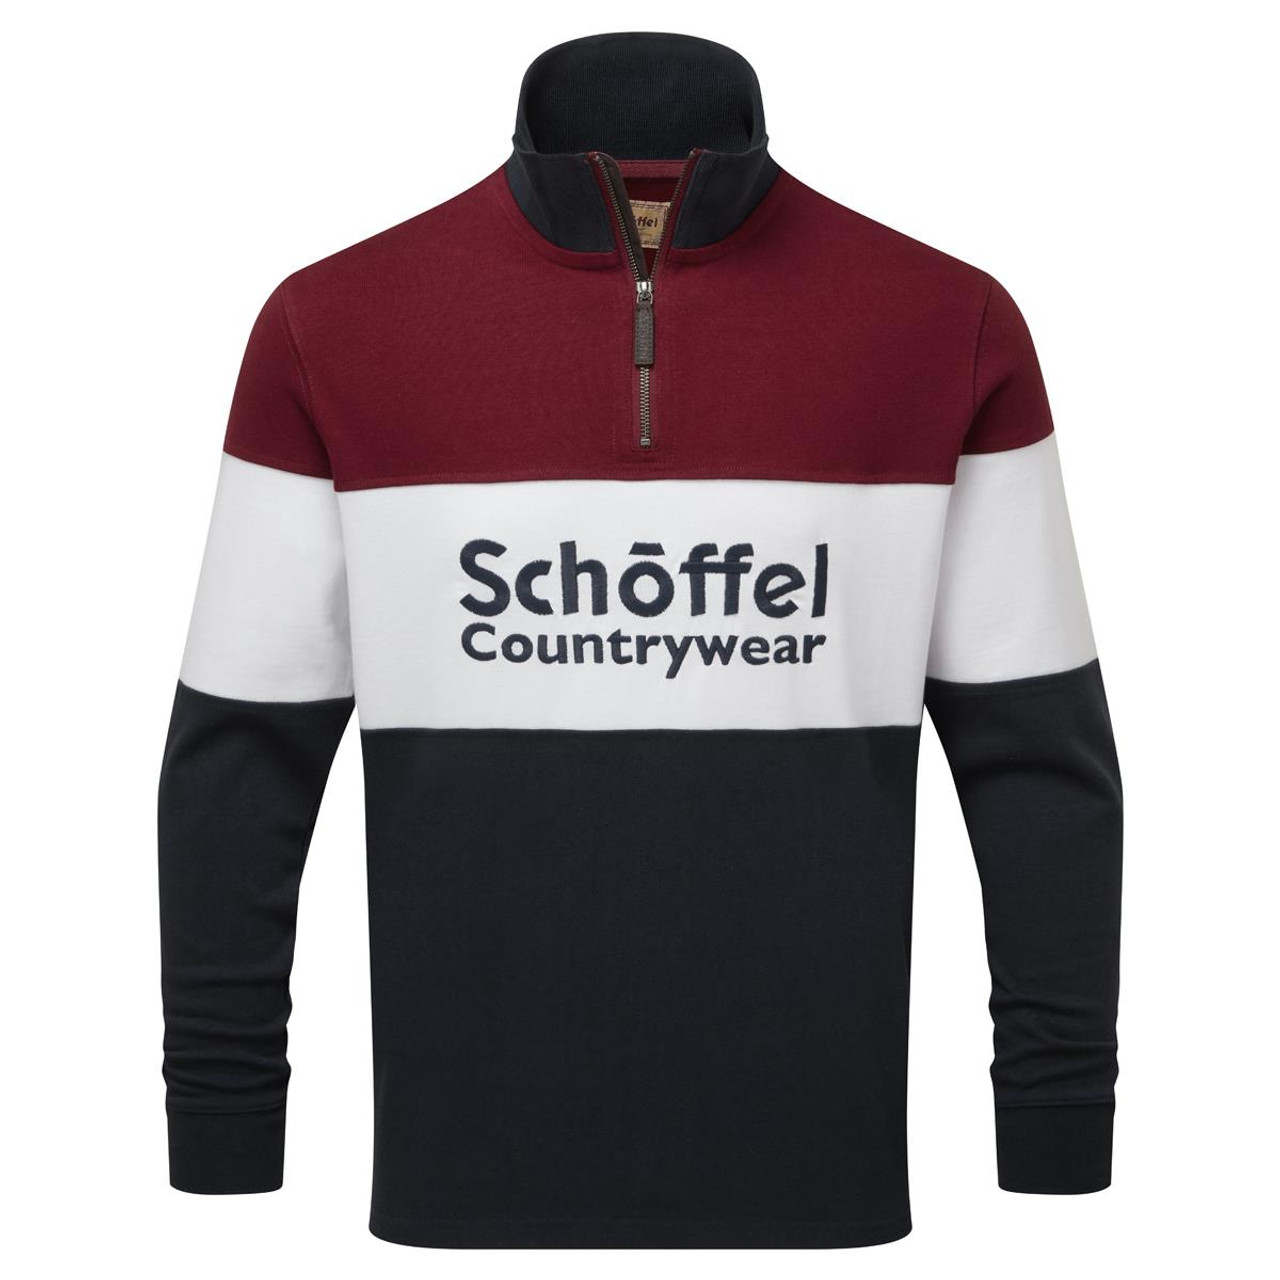 What other features does the Schoffel Exeter Heritage 1/4 Zip Unisex have?